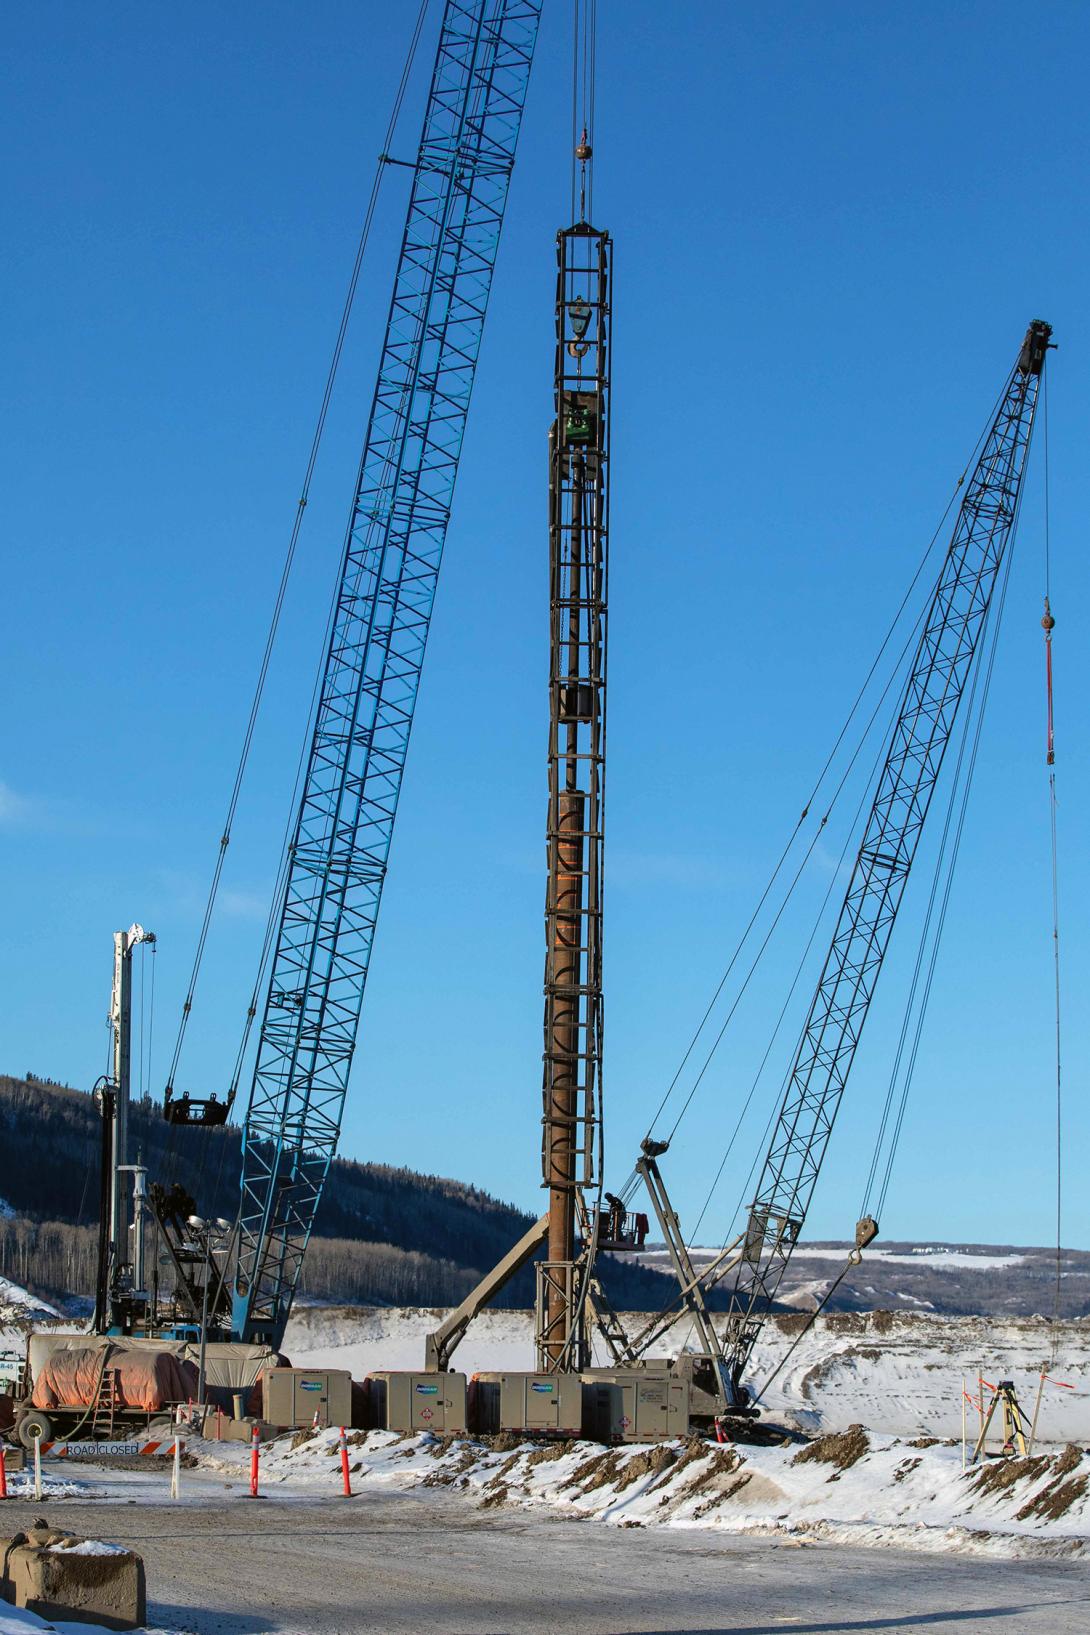 Crews prepare an interlocking steel pile for drilling at the downstream cofferdam. Both the upstream and downstream cofferdams have been installed across the river and interlocking steel pile walls have been completed. | January 2021